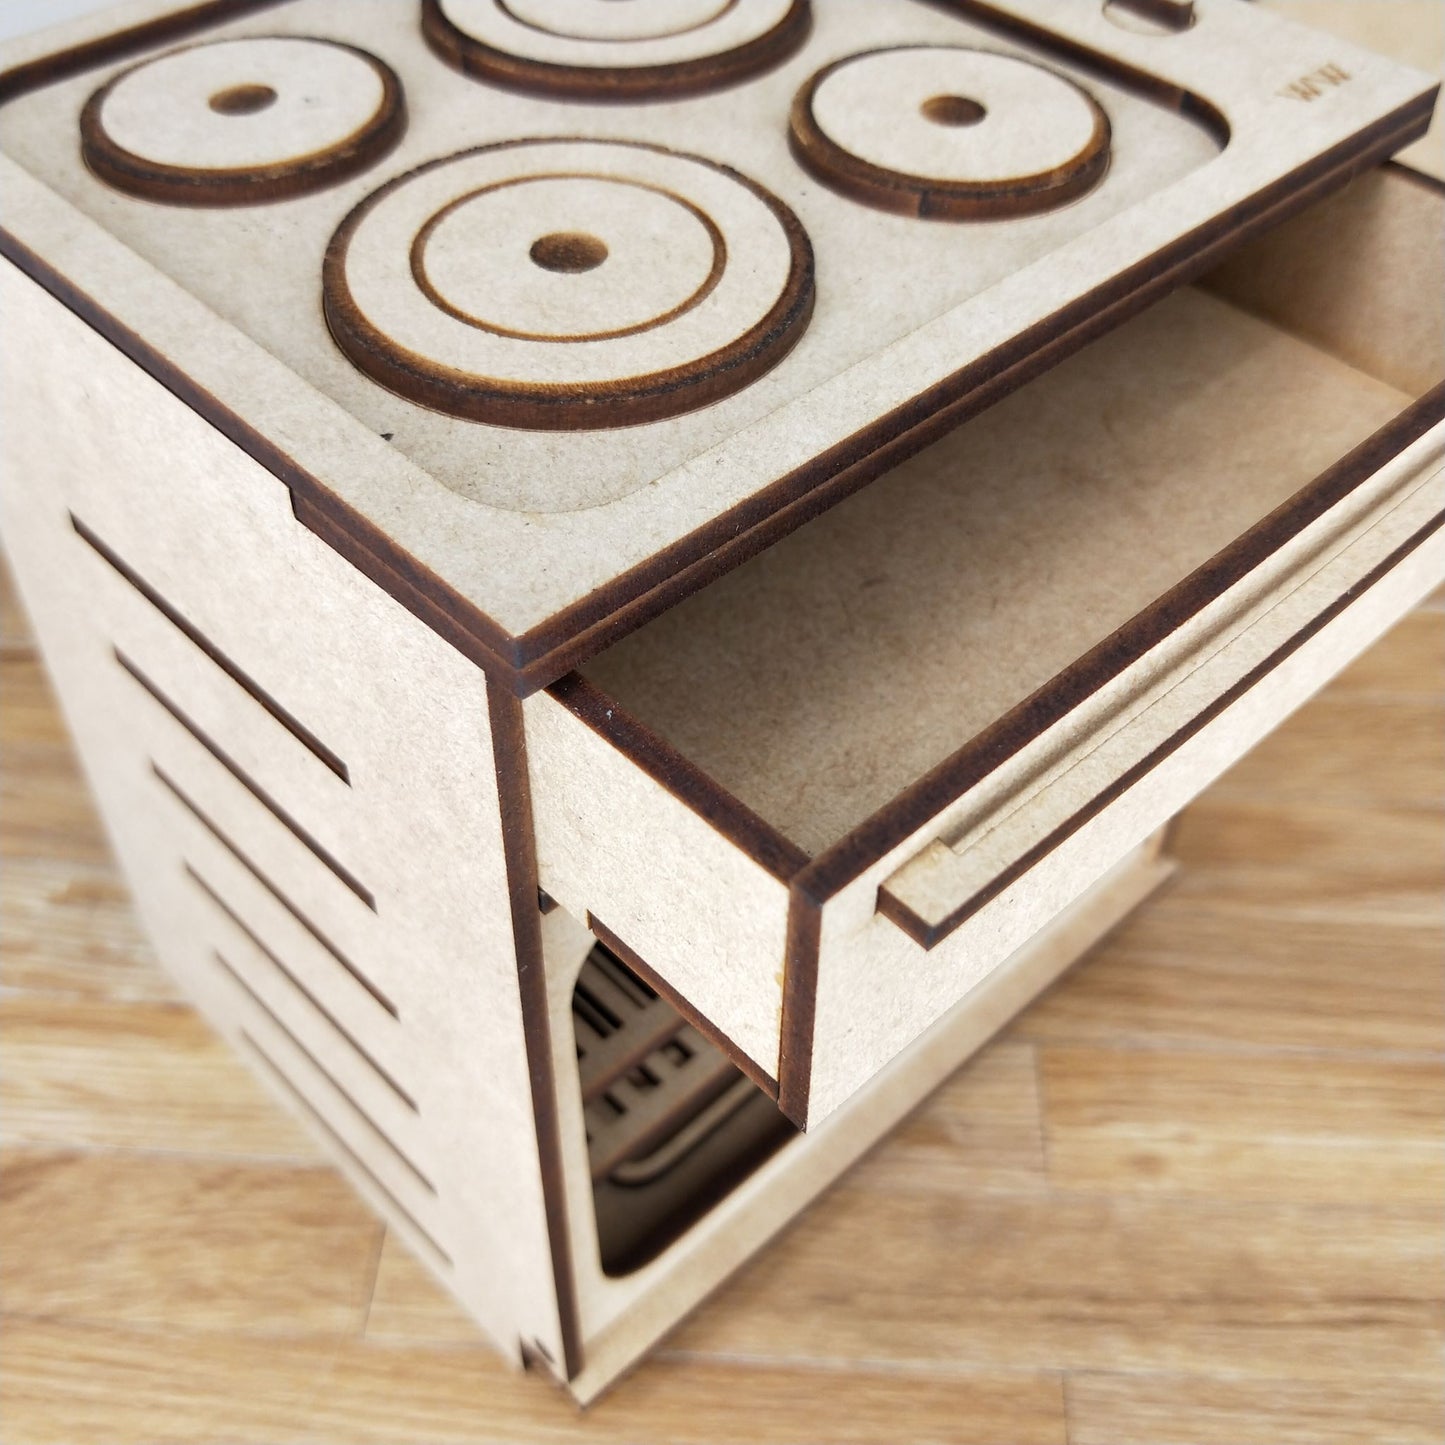 DIY Wooden Kit - 1/6 Scale 'Electric' Oven